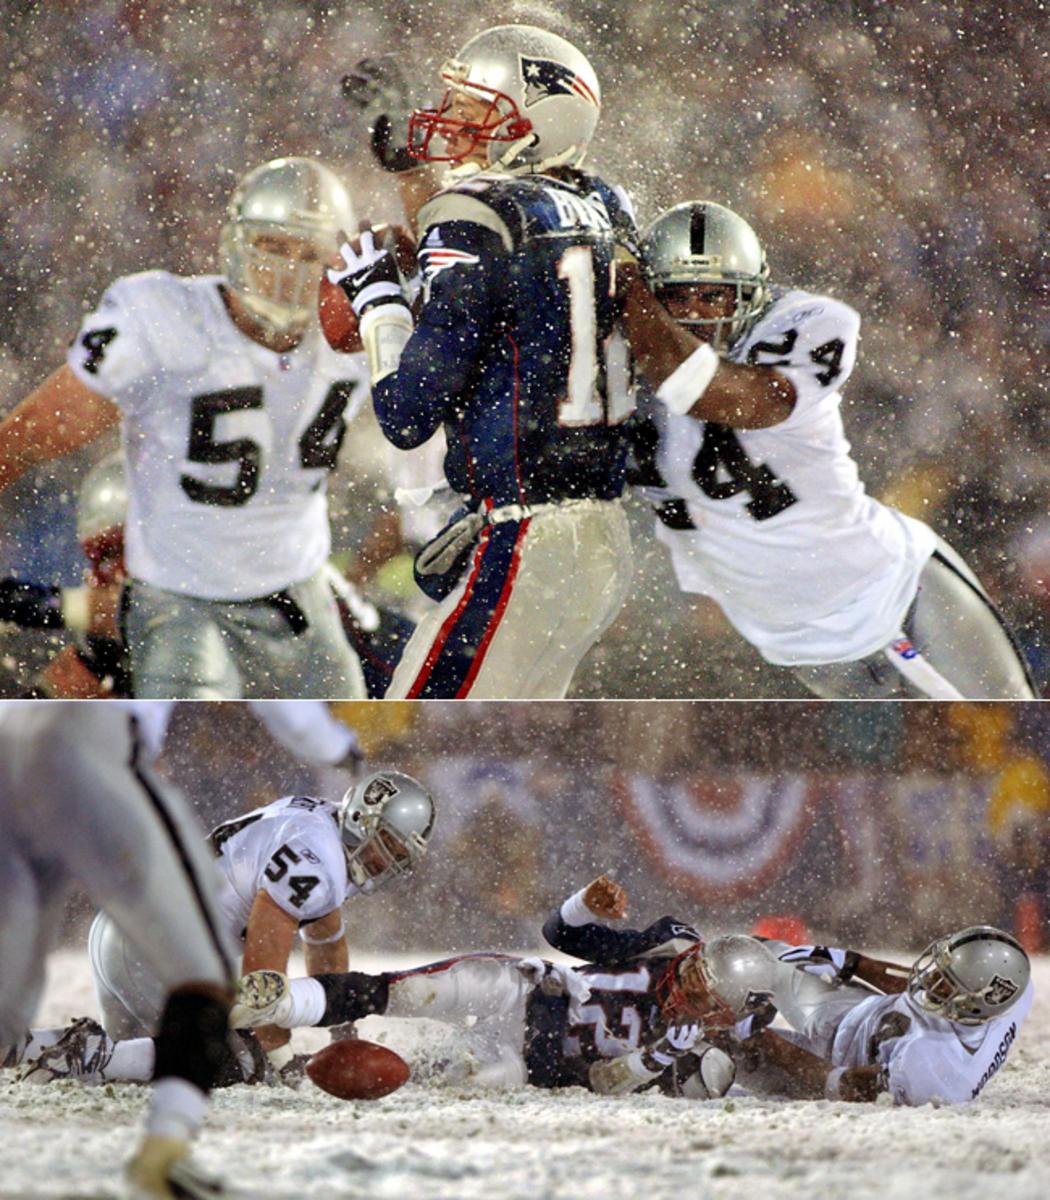 Charles Woodson says he has never spoken with Tom Brady, a fellow Michigan alum, about the Tuck Rule game.